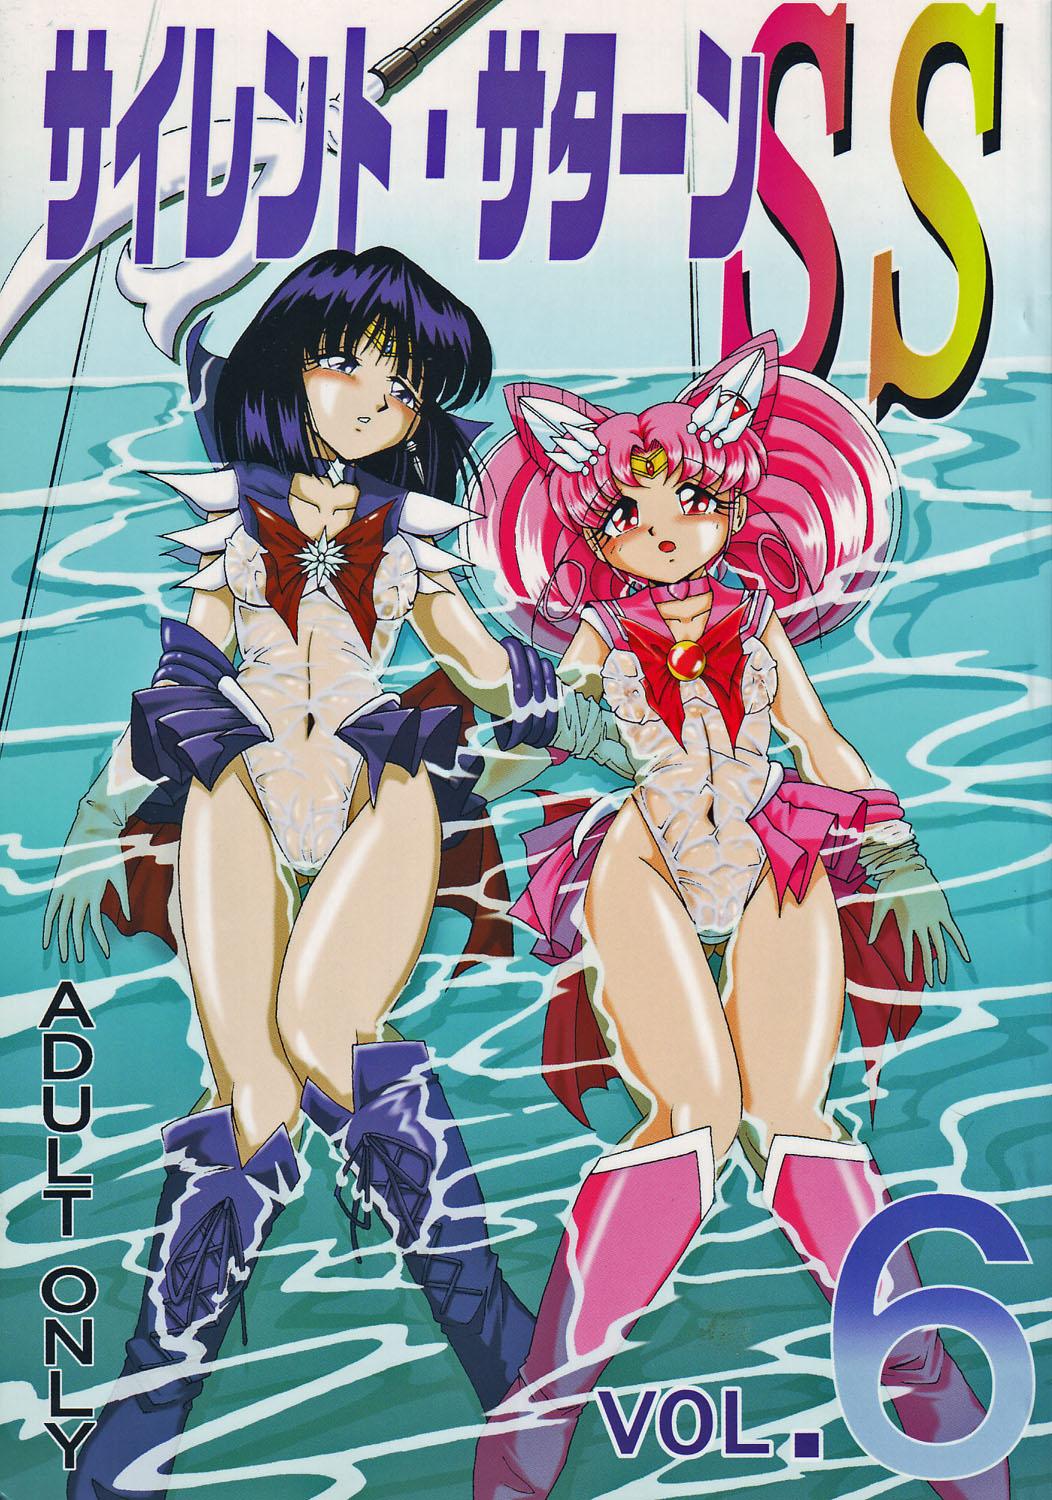 Belly Silent Saturn SS vol. 6 - Sailor moon Friend - Picture 1